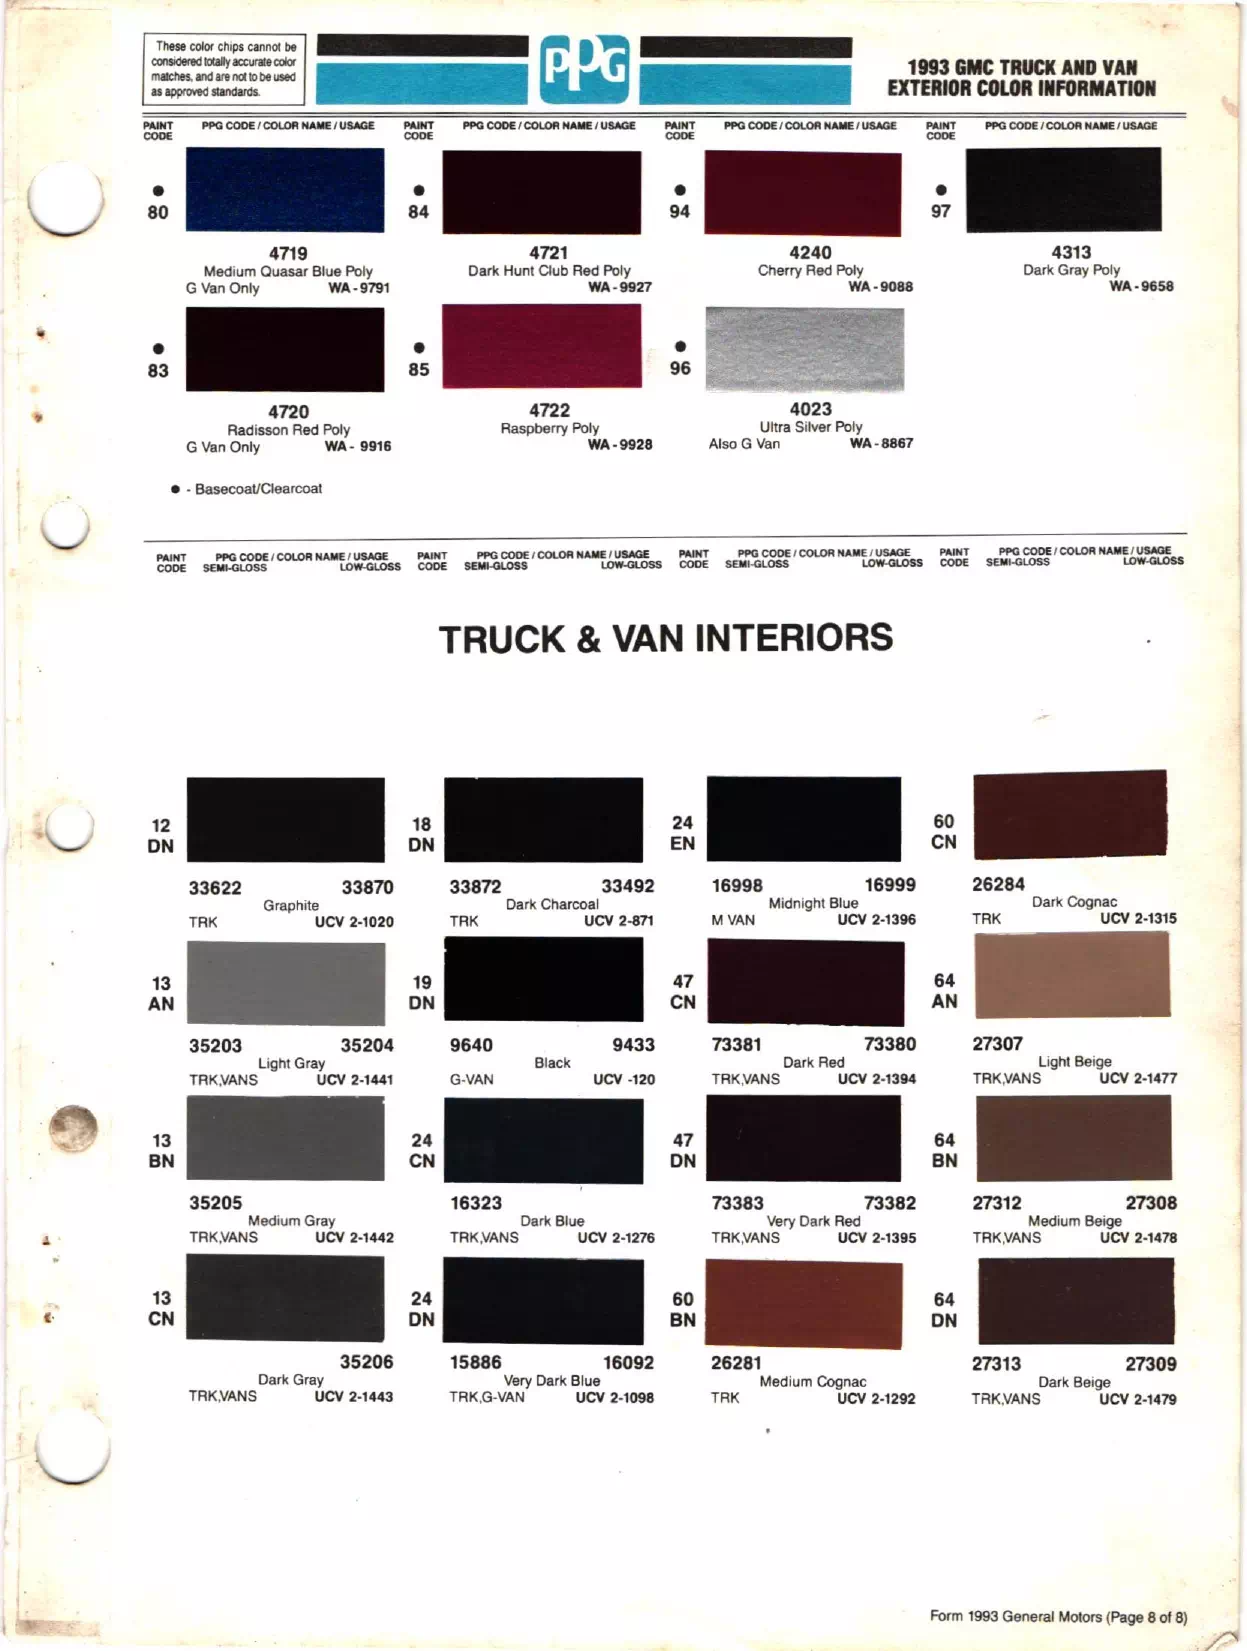 Paint codes and color swatches for 1993 Gmc trucks